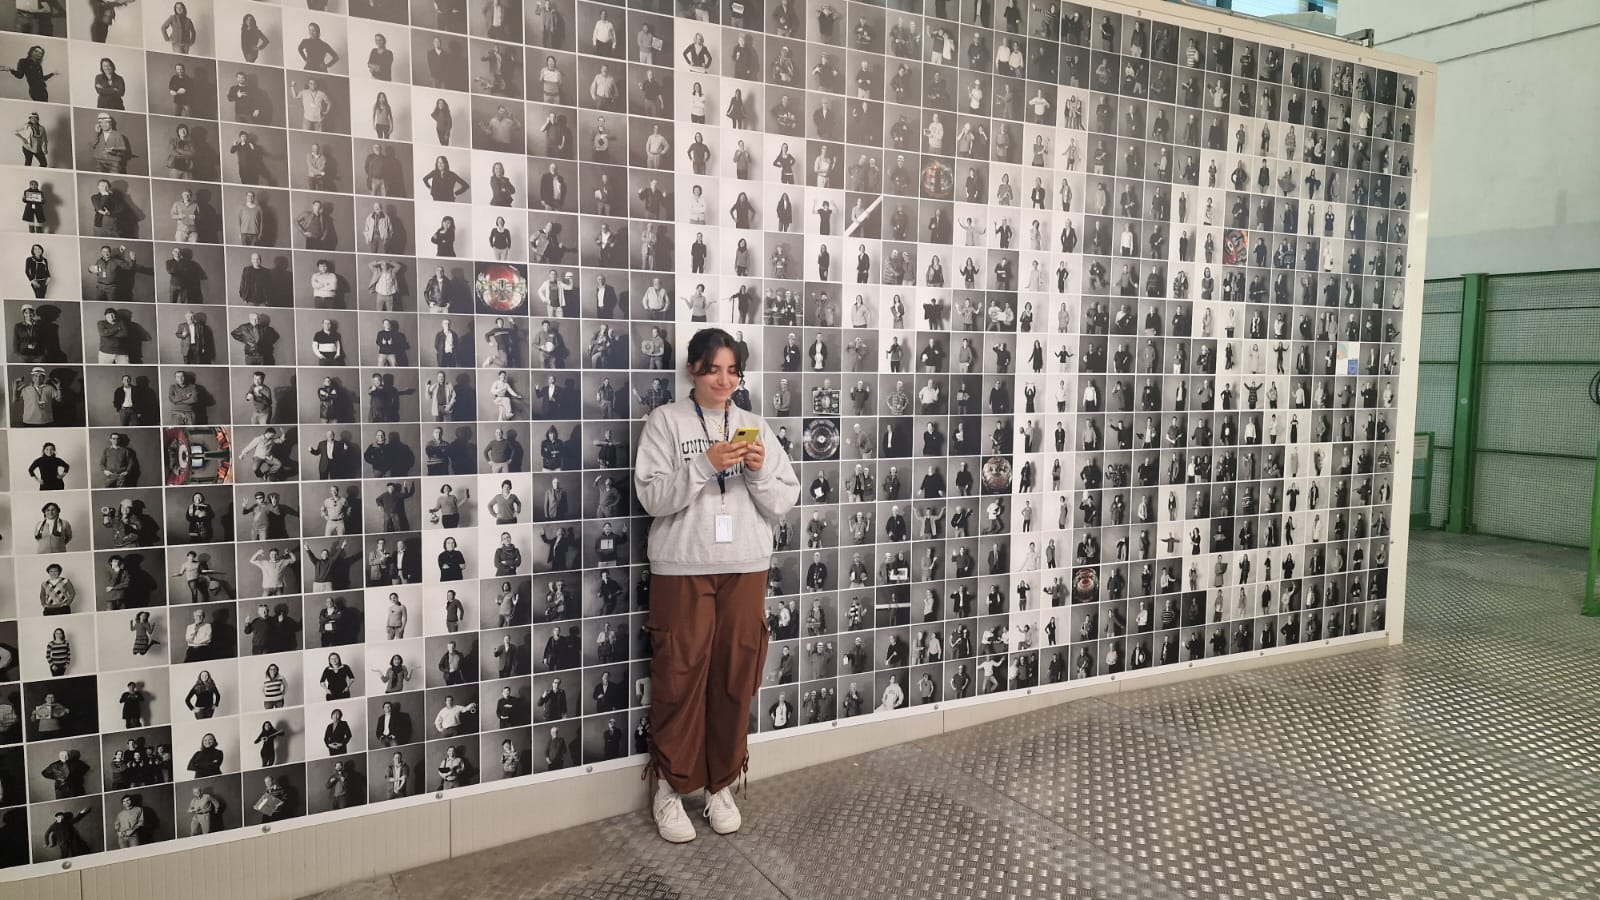 Marina in front of the CMS “wall of fame” at Point 5. Credits: Inna Berzhetska